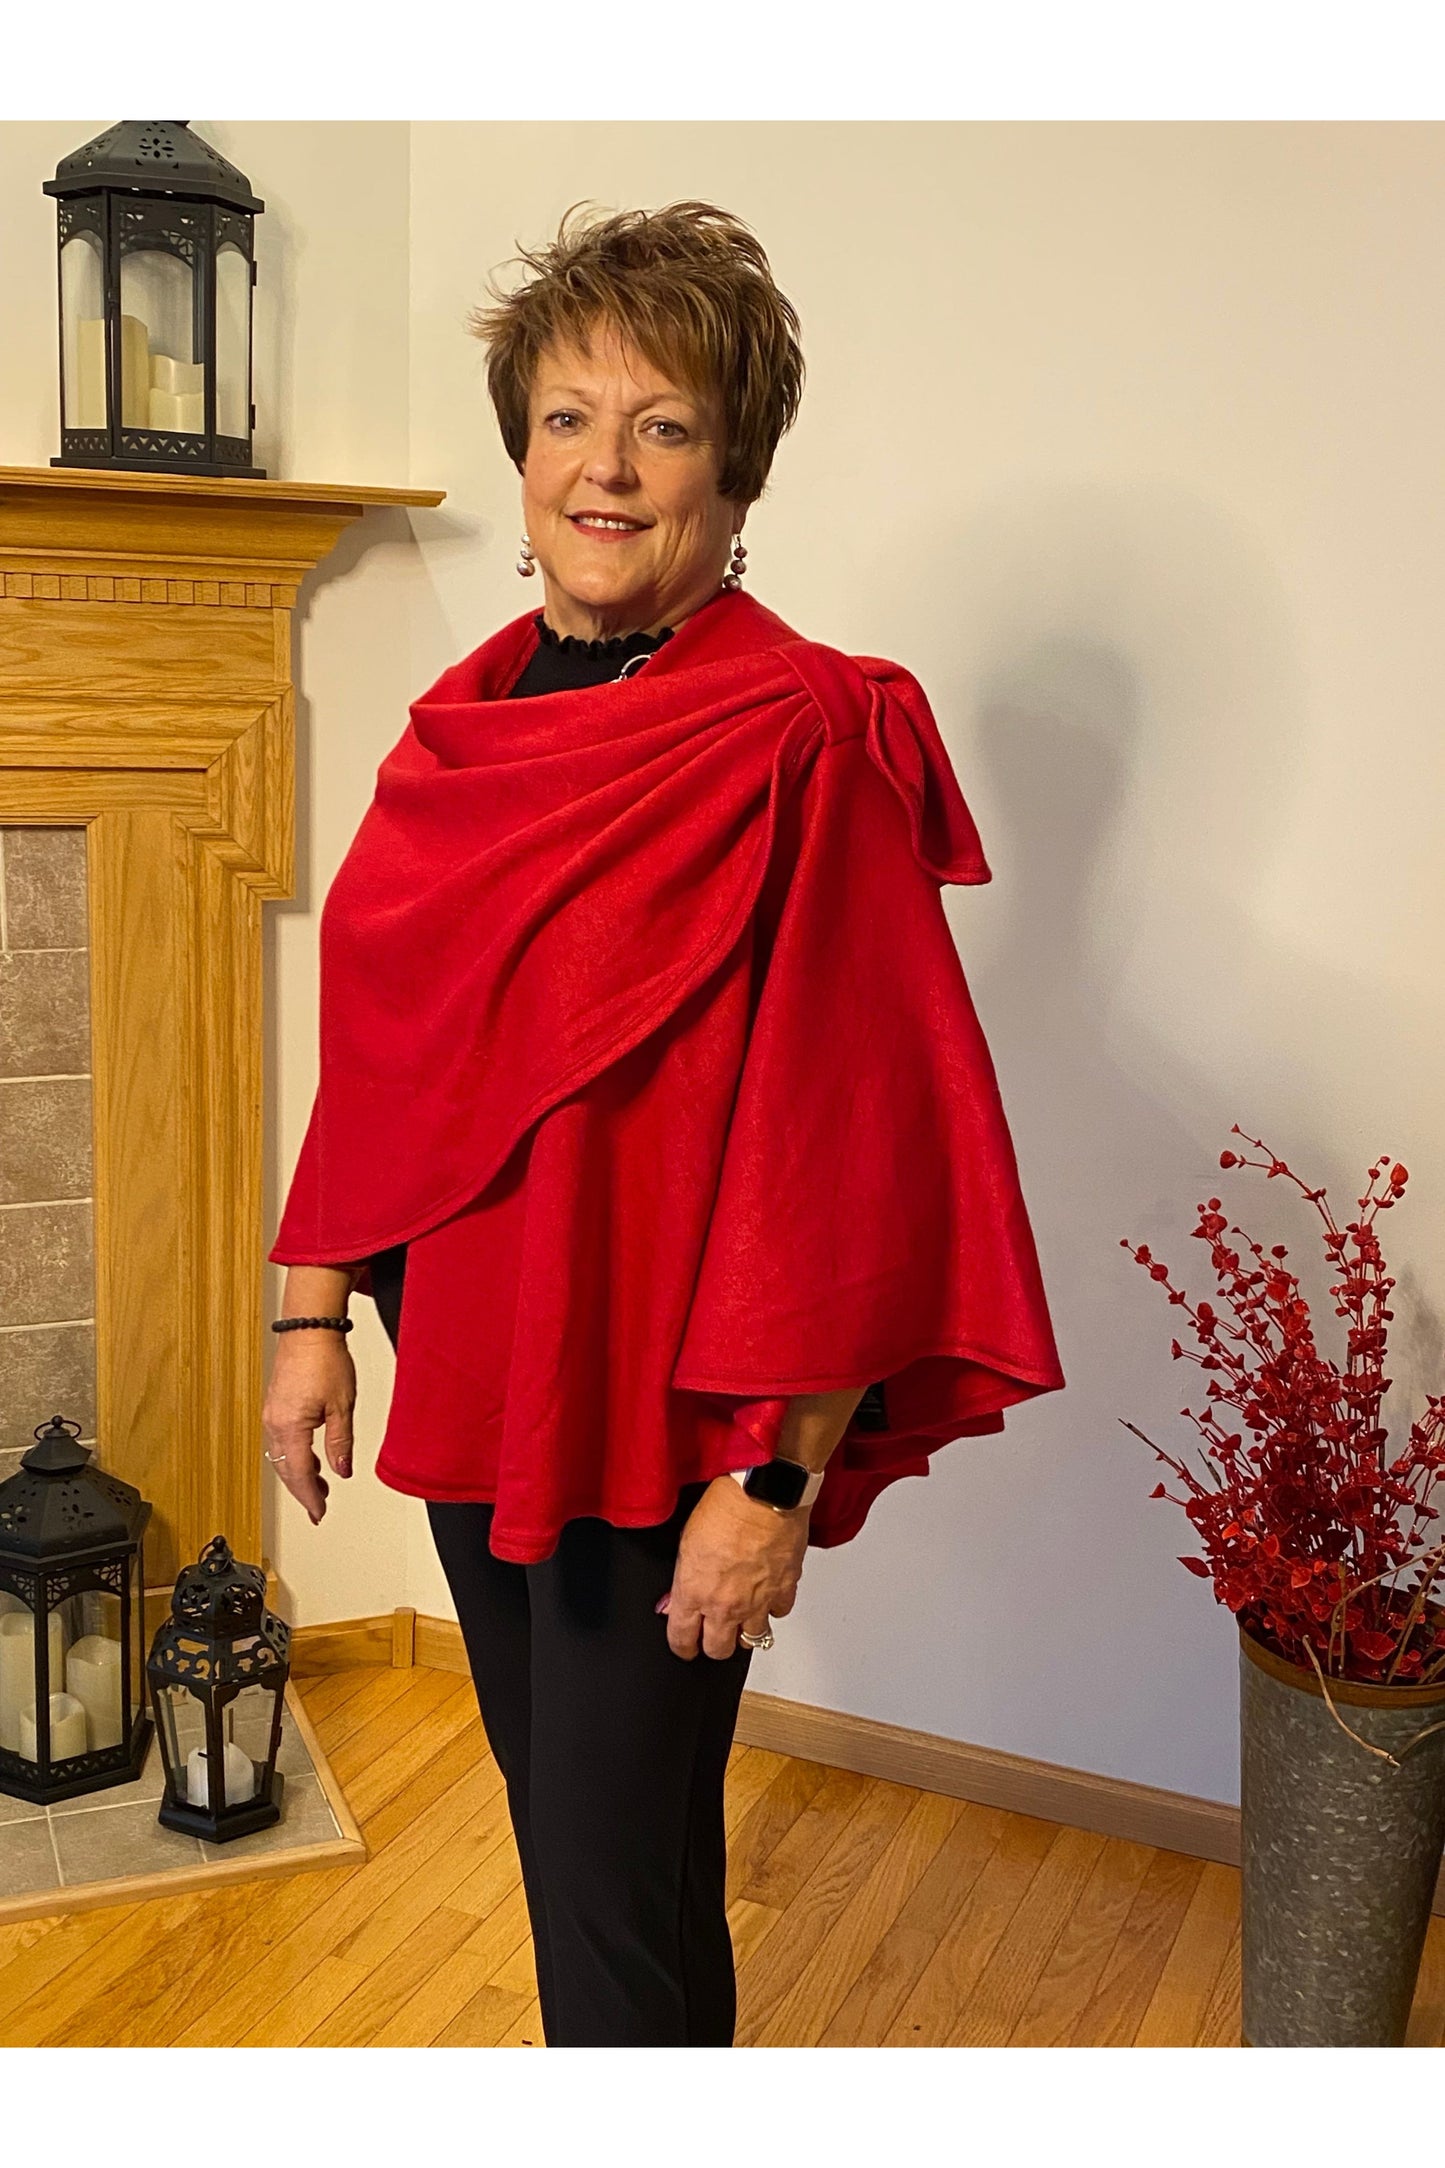 Pure Essence - Circular Shawl With Tab Holder On Top of Shoulder - Style #379-4428